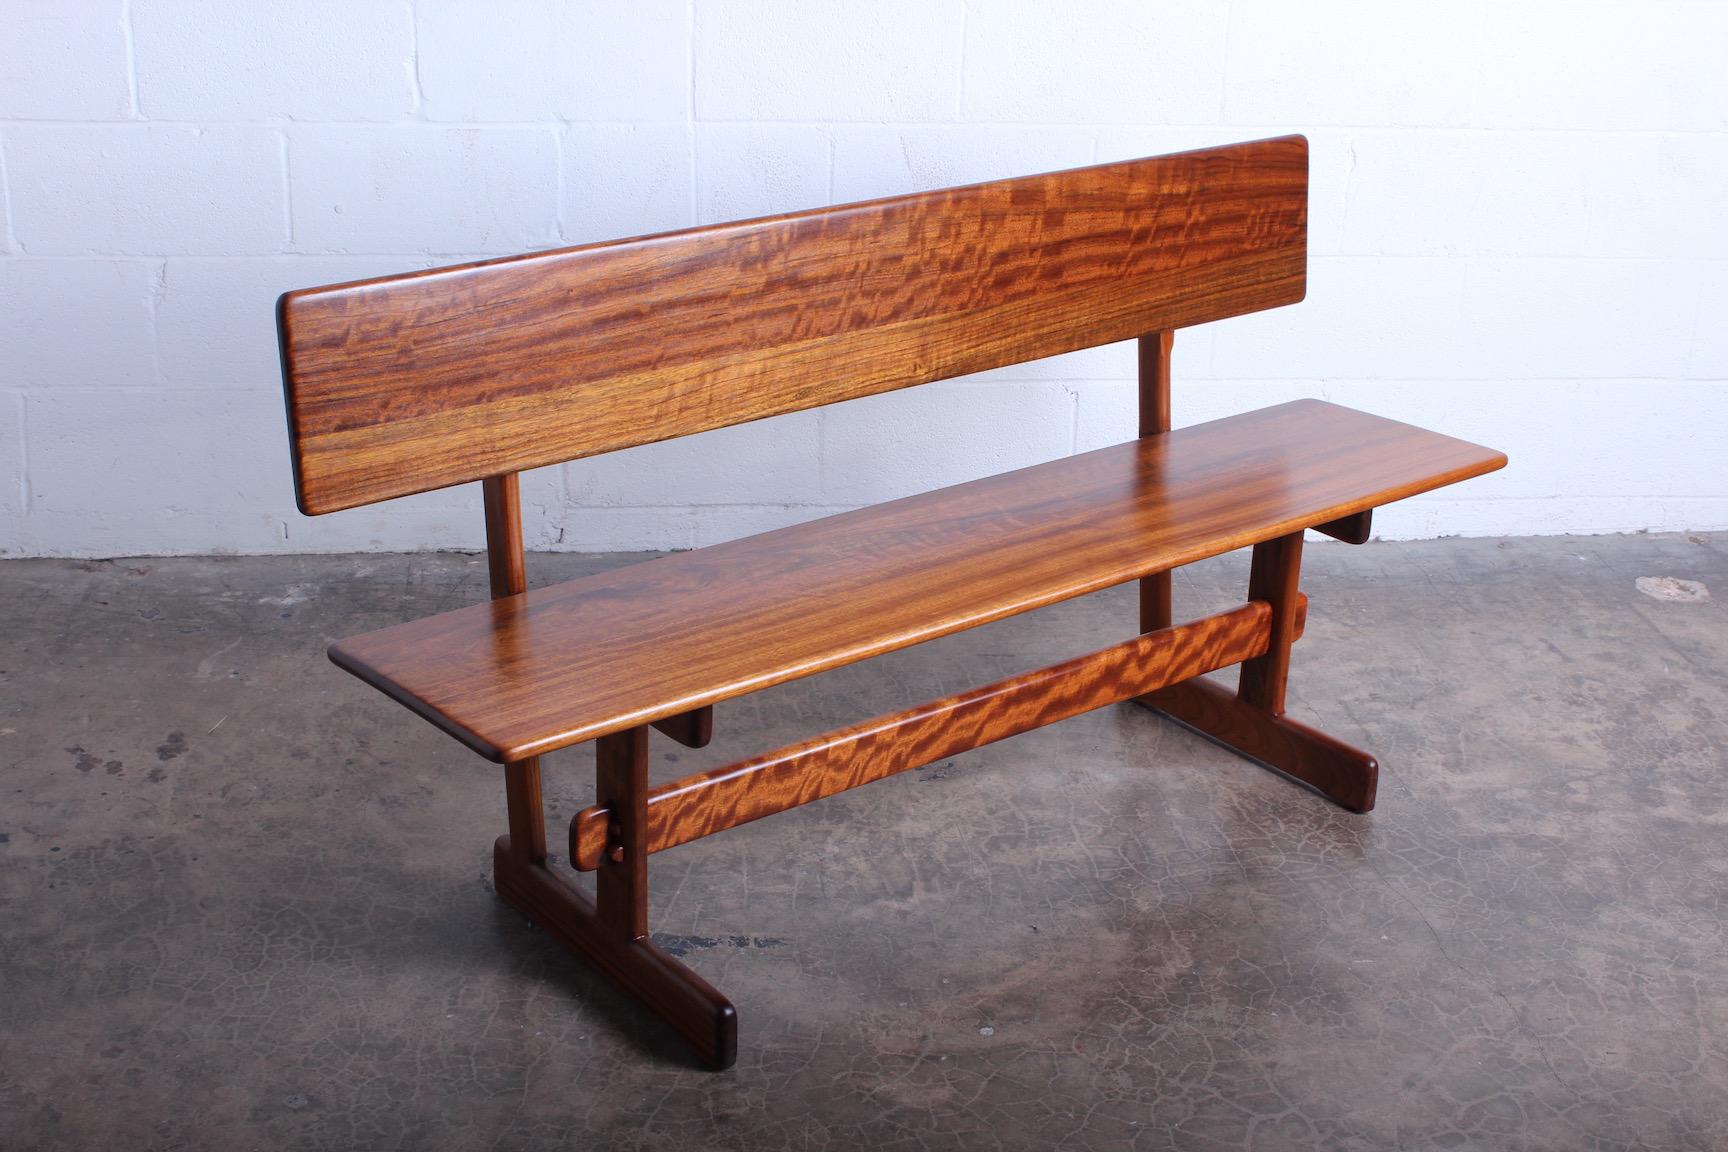 Trestle bench in African Shedua by Gerald McCabe for Orange Crate Modern.